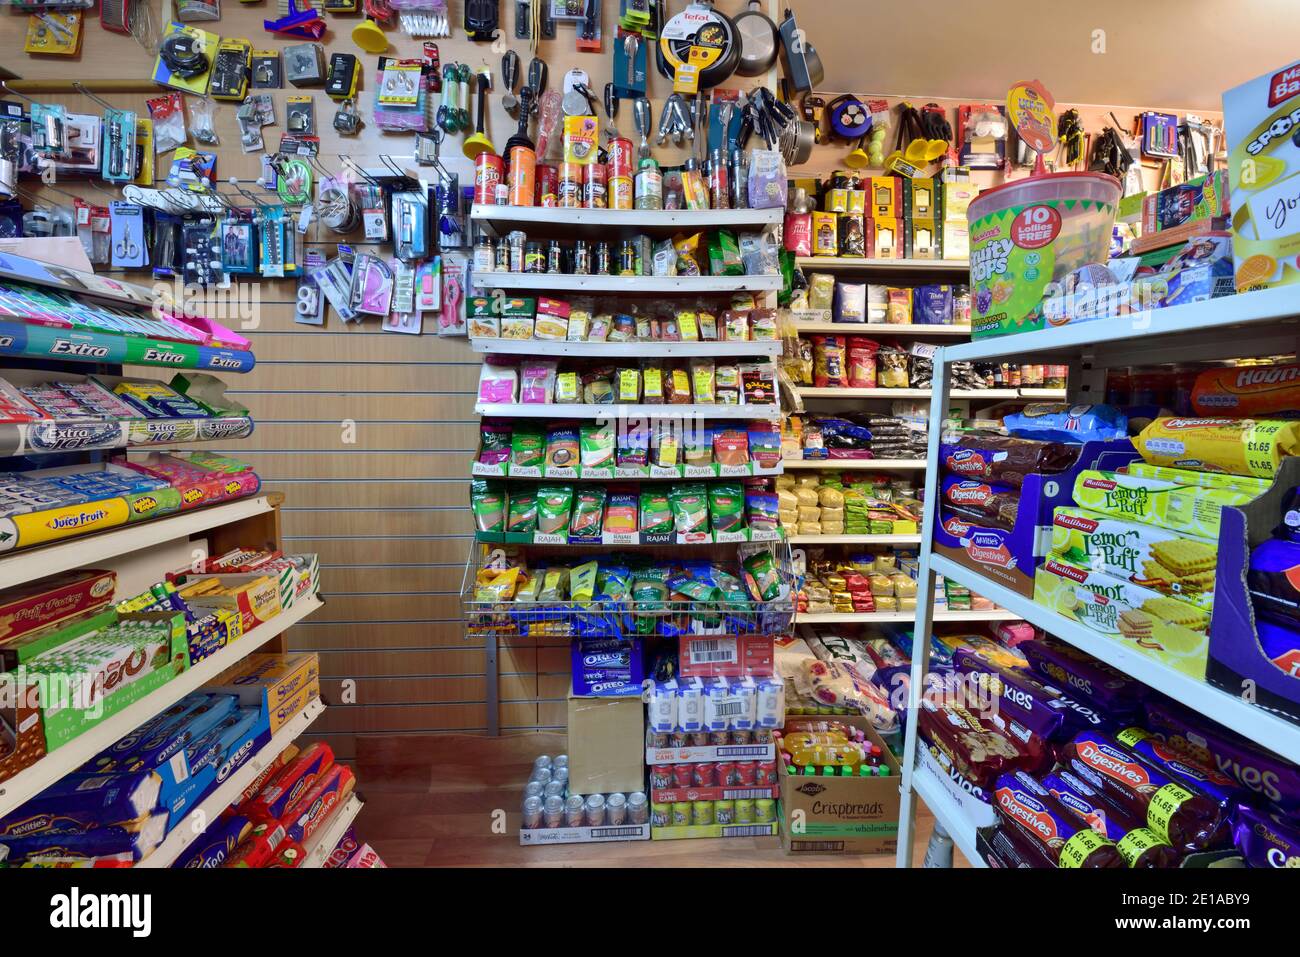 Shelves full of wide range of foods, spices and household items in local small corner shop, metro convenience store, UK Stock Photo